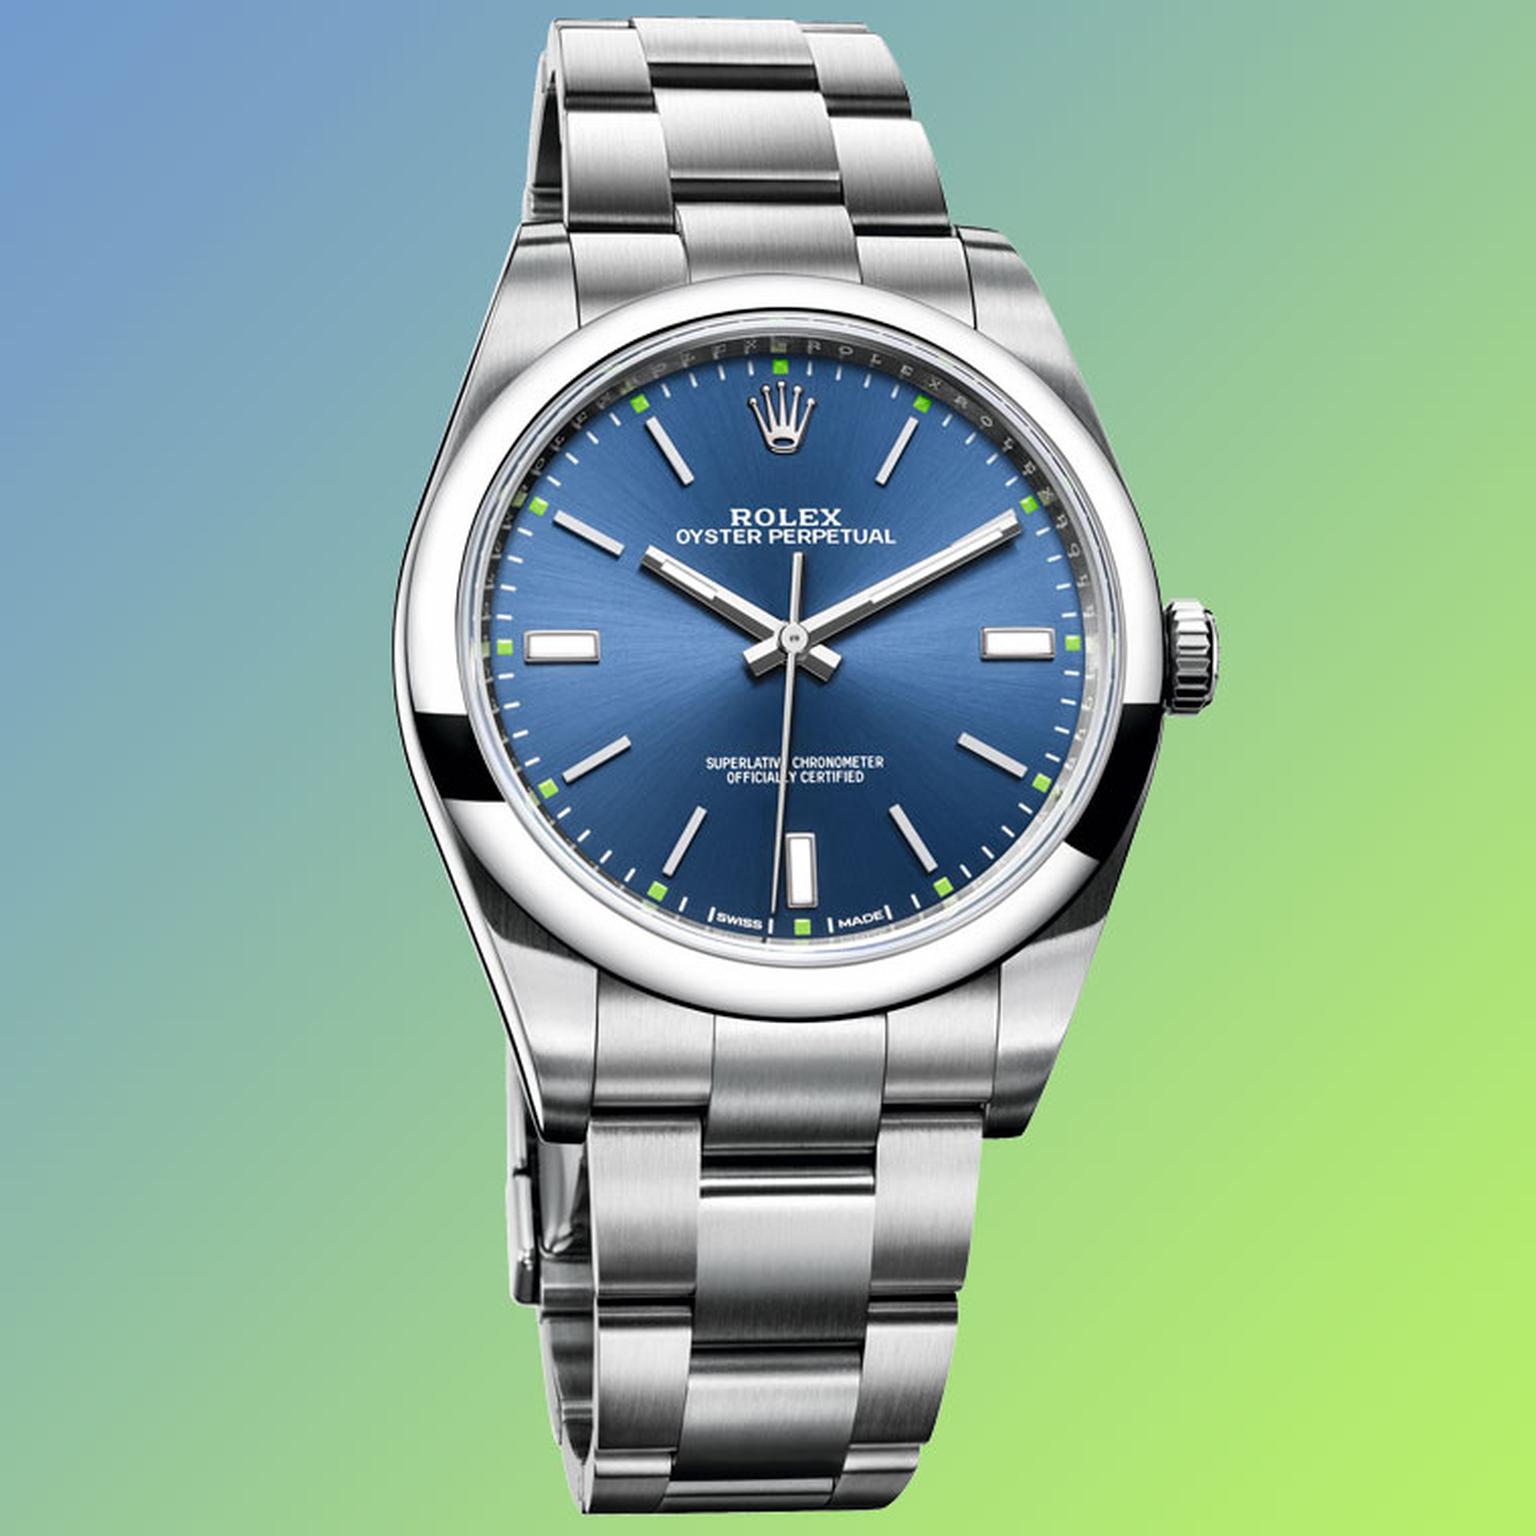 Oyster Perpetual 39mm Watch Rolex The Jewellery Editor